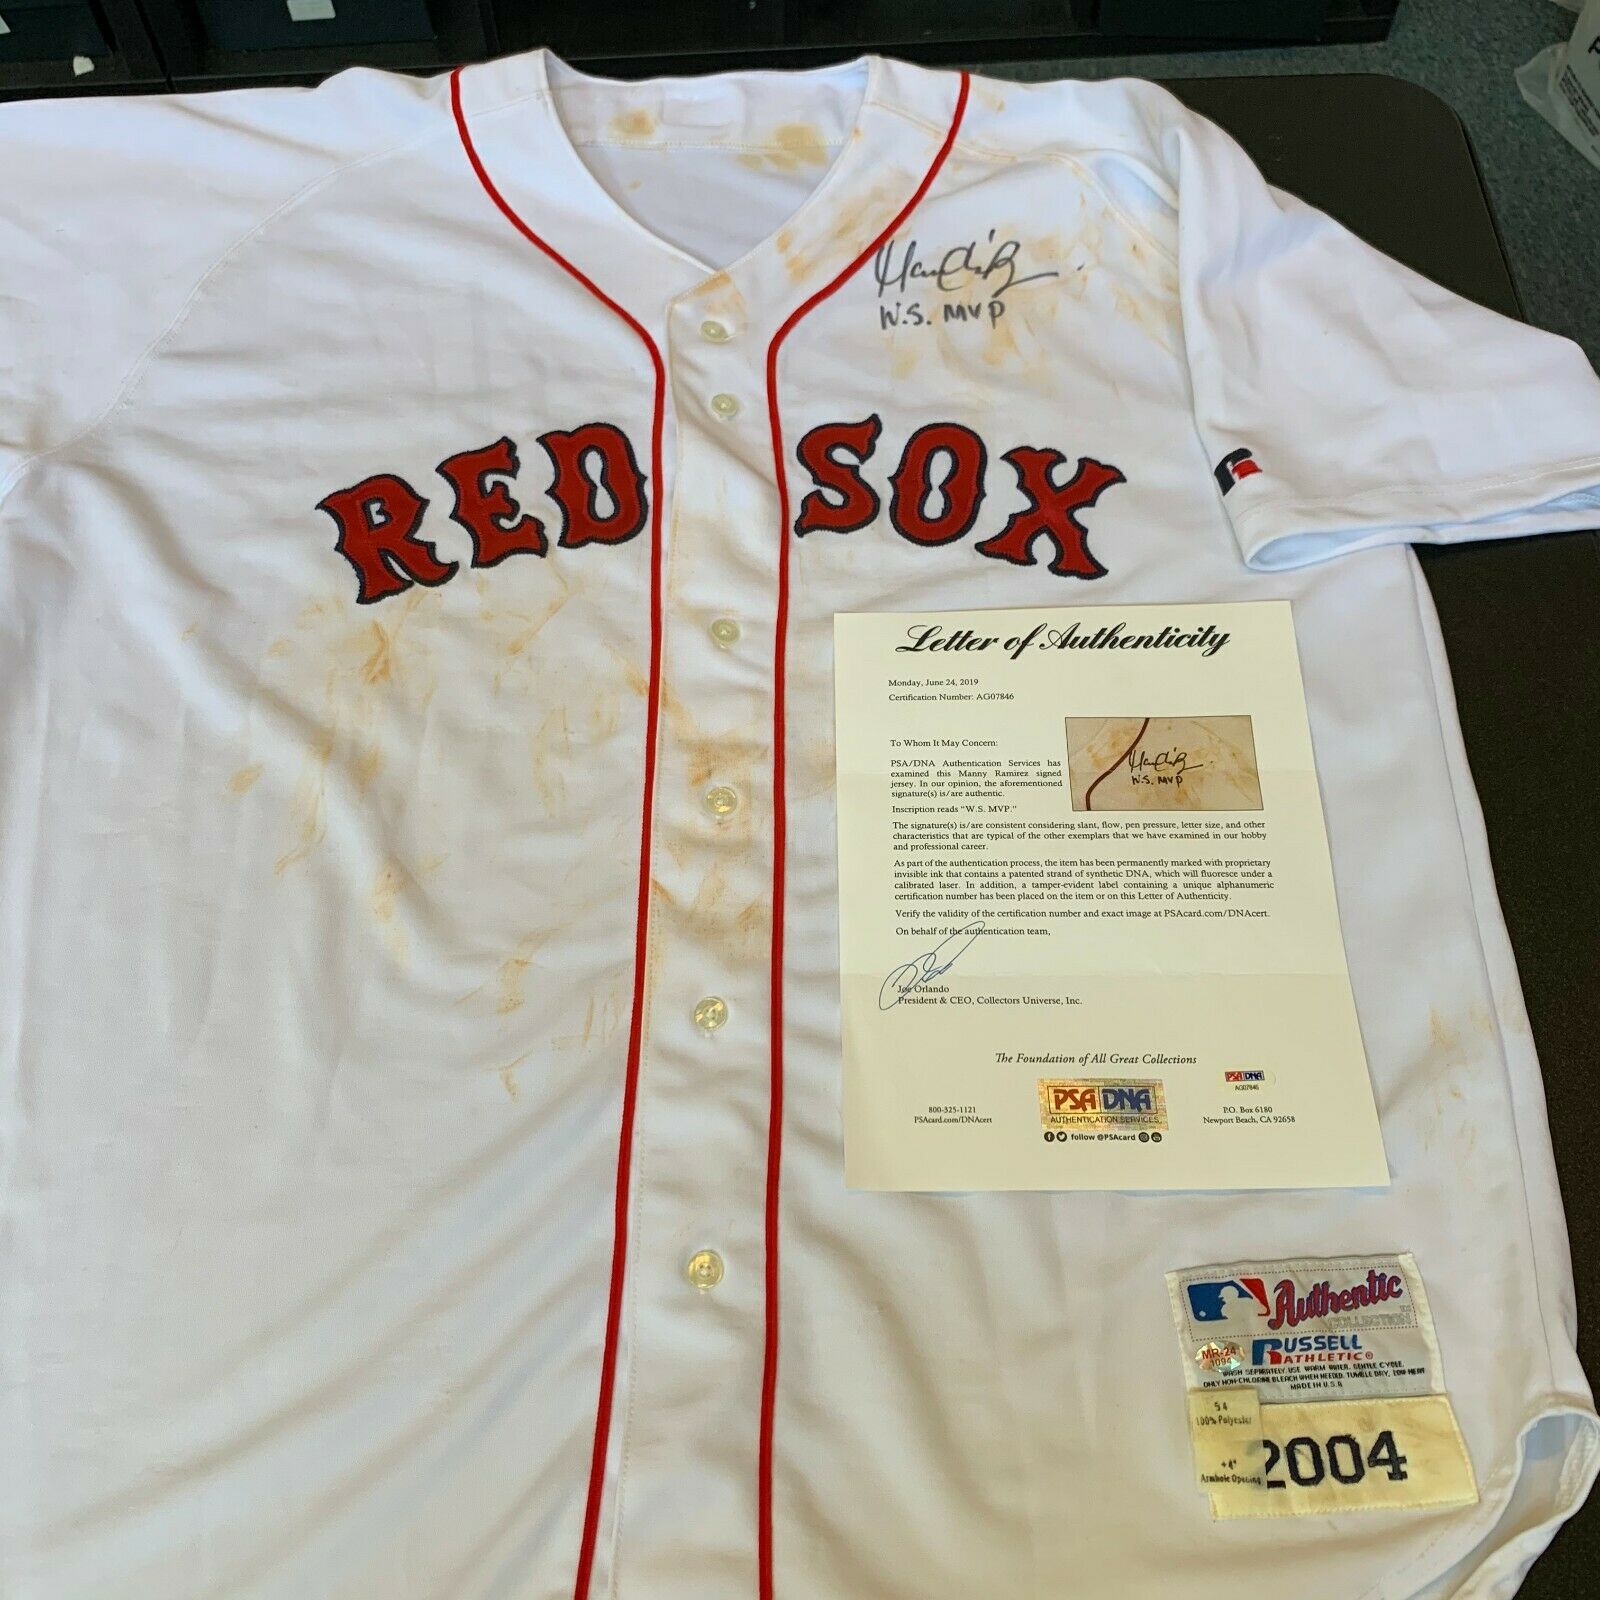 Manny Ramirez Signed 2004 Boston Red Sox Game Used Jersey With PSA